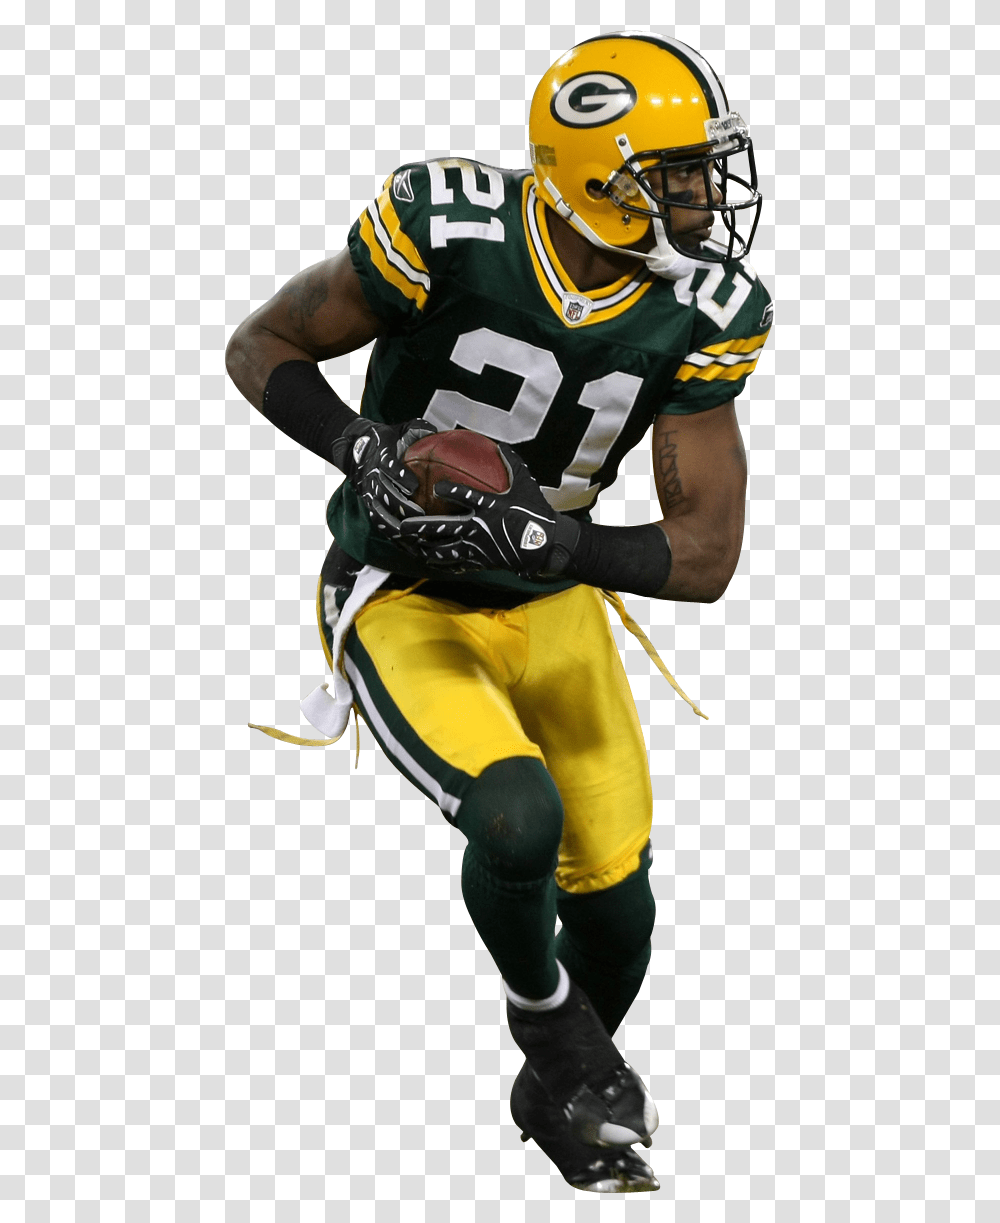 Green Bay Packers Green Bay Packers Players Green Bay Packers Players, Apparel, Helmet, Person Transparent Png